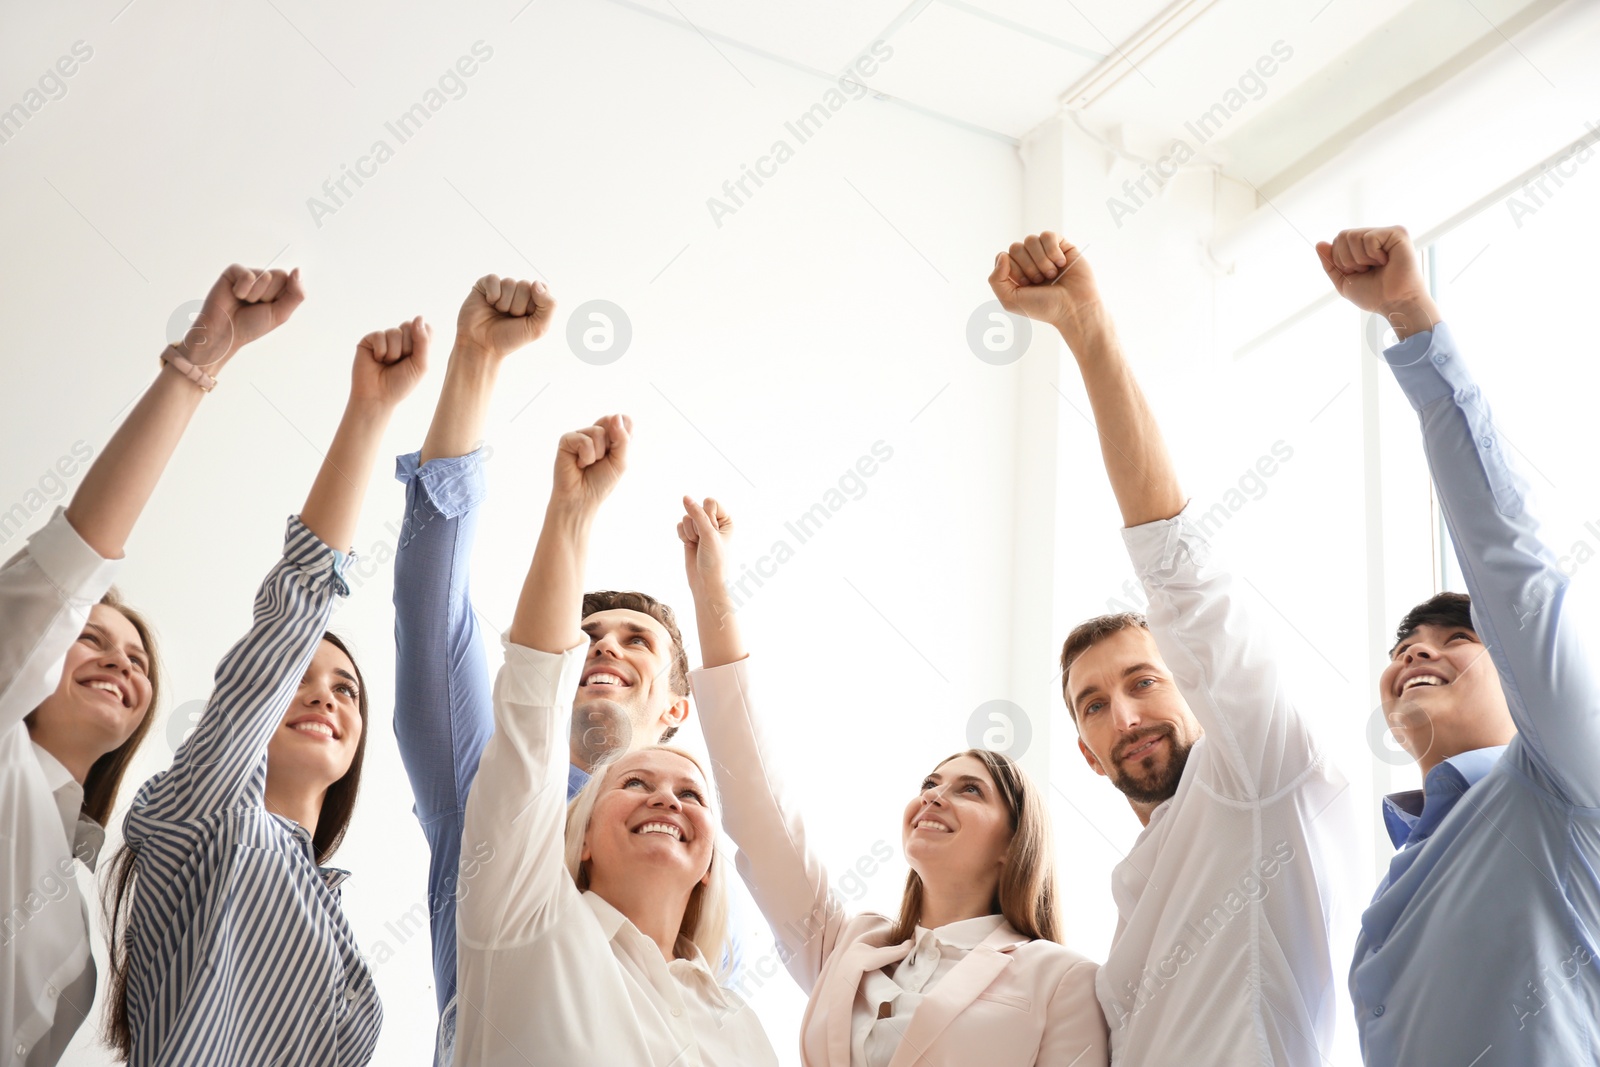 Photo of People raising fists together indoors. Unity concept